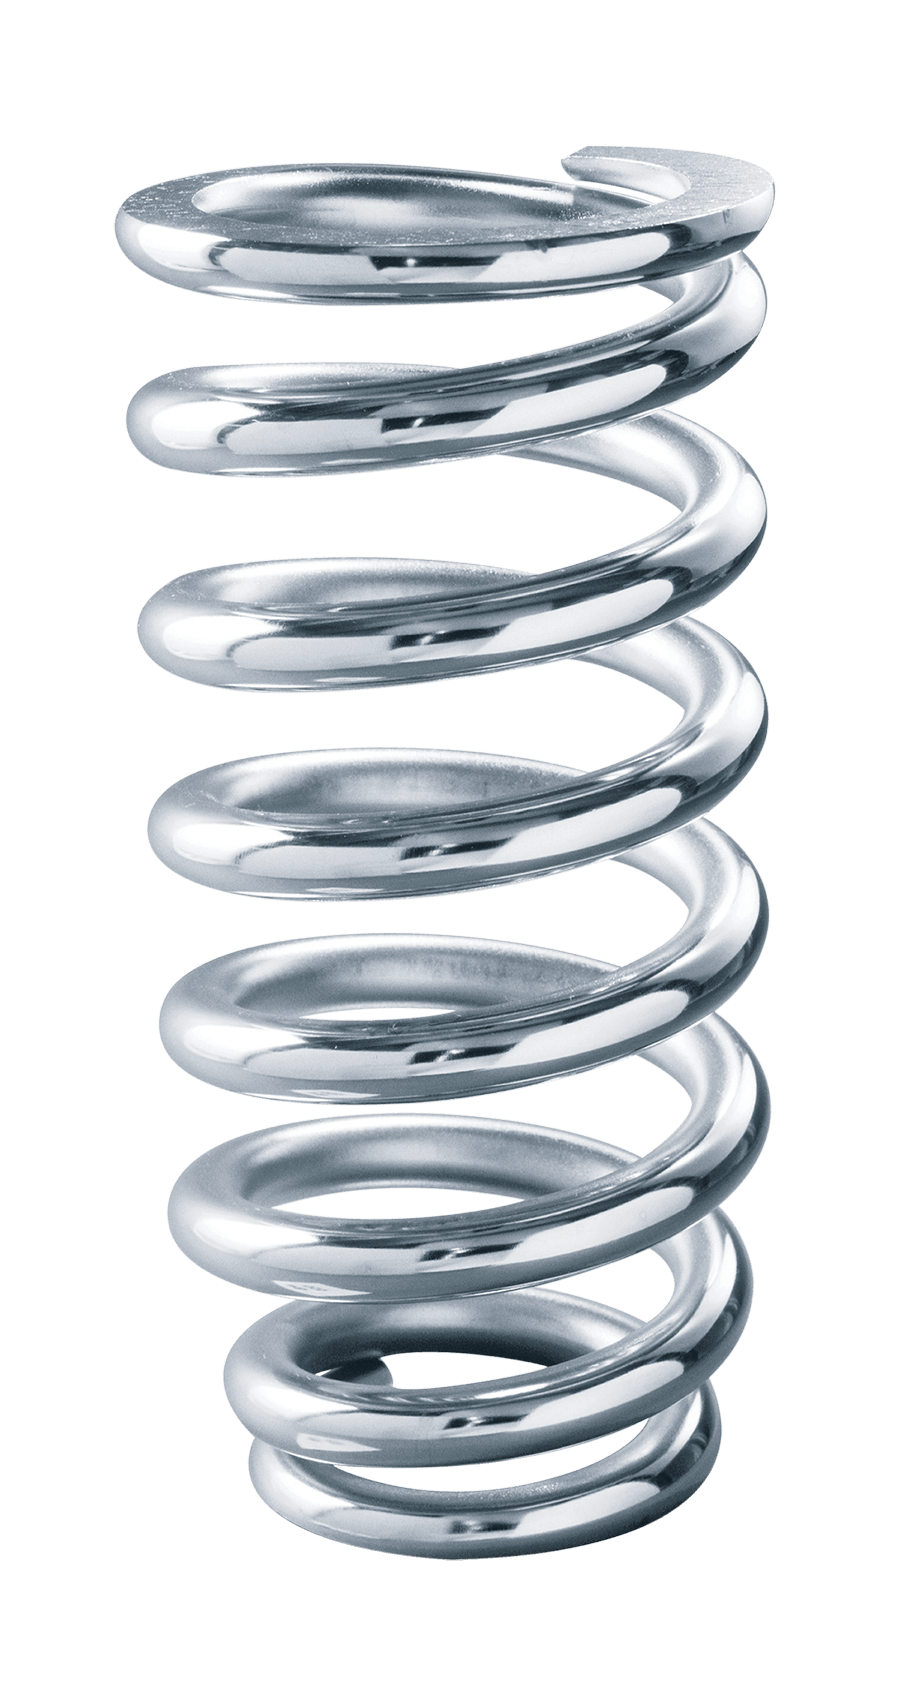 QA1 8MB375 Spring Chrome Silicon 3-1/2 Id 8-375 Lbs Chrome Plated 1St Coil Tapered